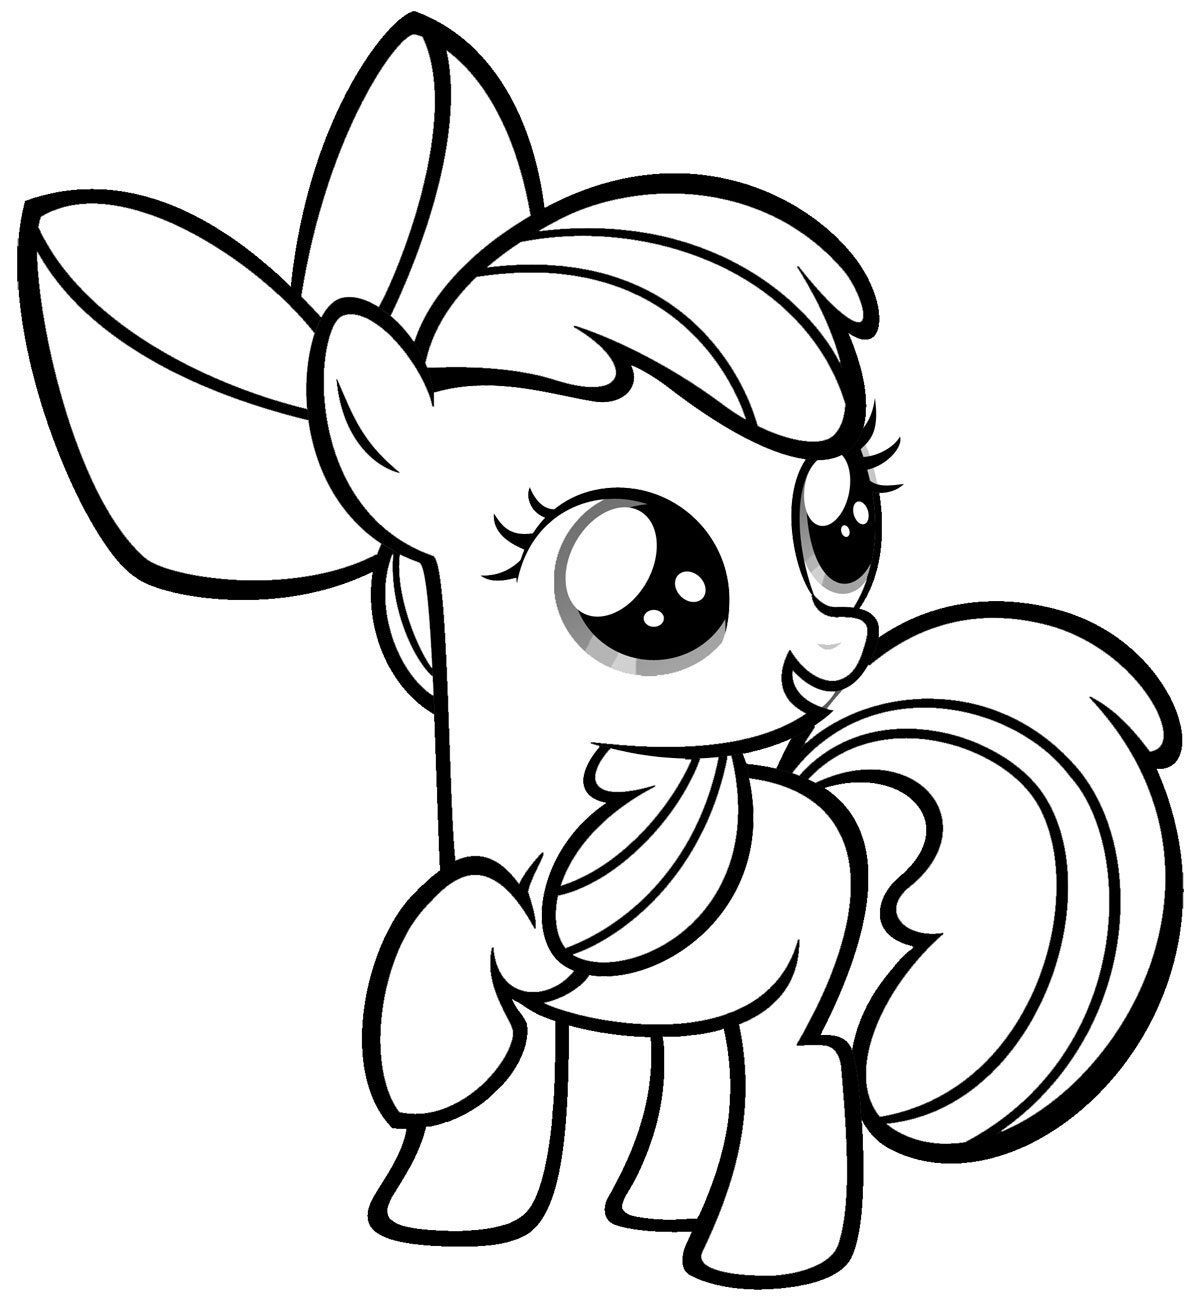 Coloring Sheets For Little Kids
 My Little Pony Coloring Pages to Print